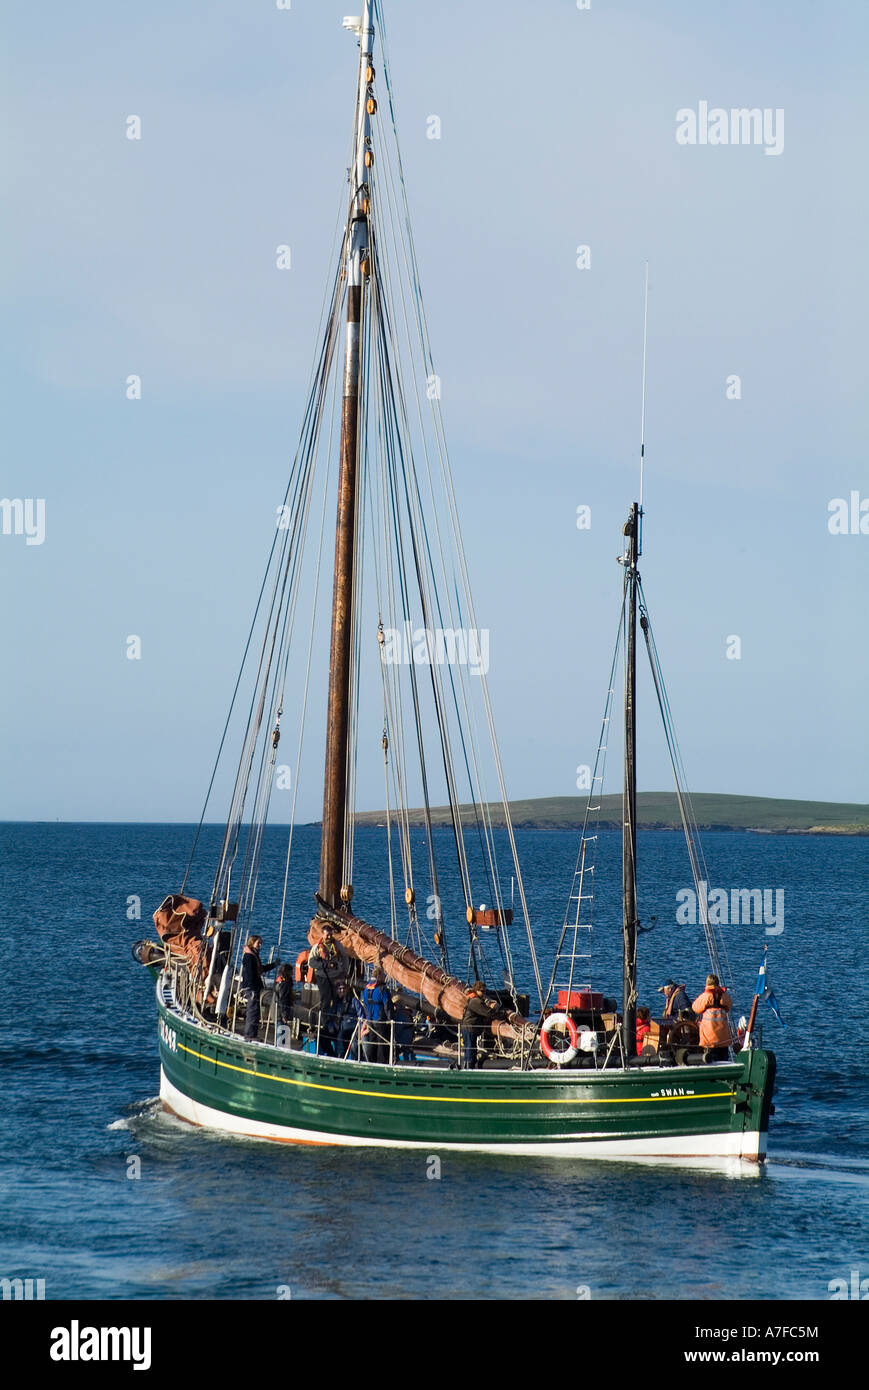 dh The Swan KIRKWALL ORKNEY Fifie type herring drifter two masted lugger departing Kirkwall Bay Stock Photo